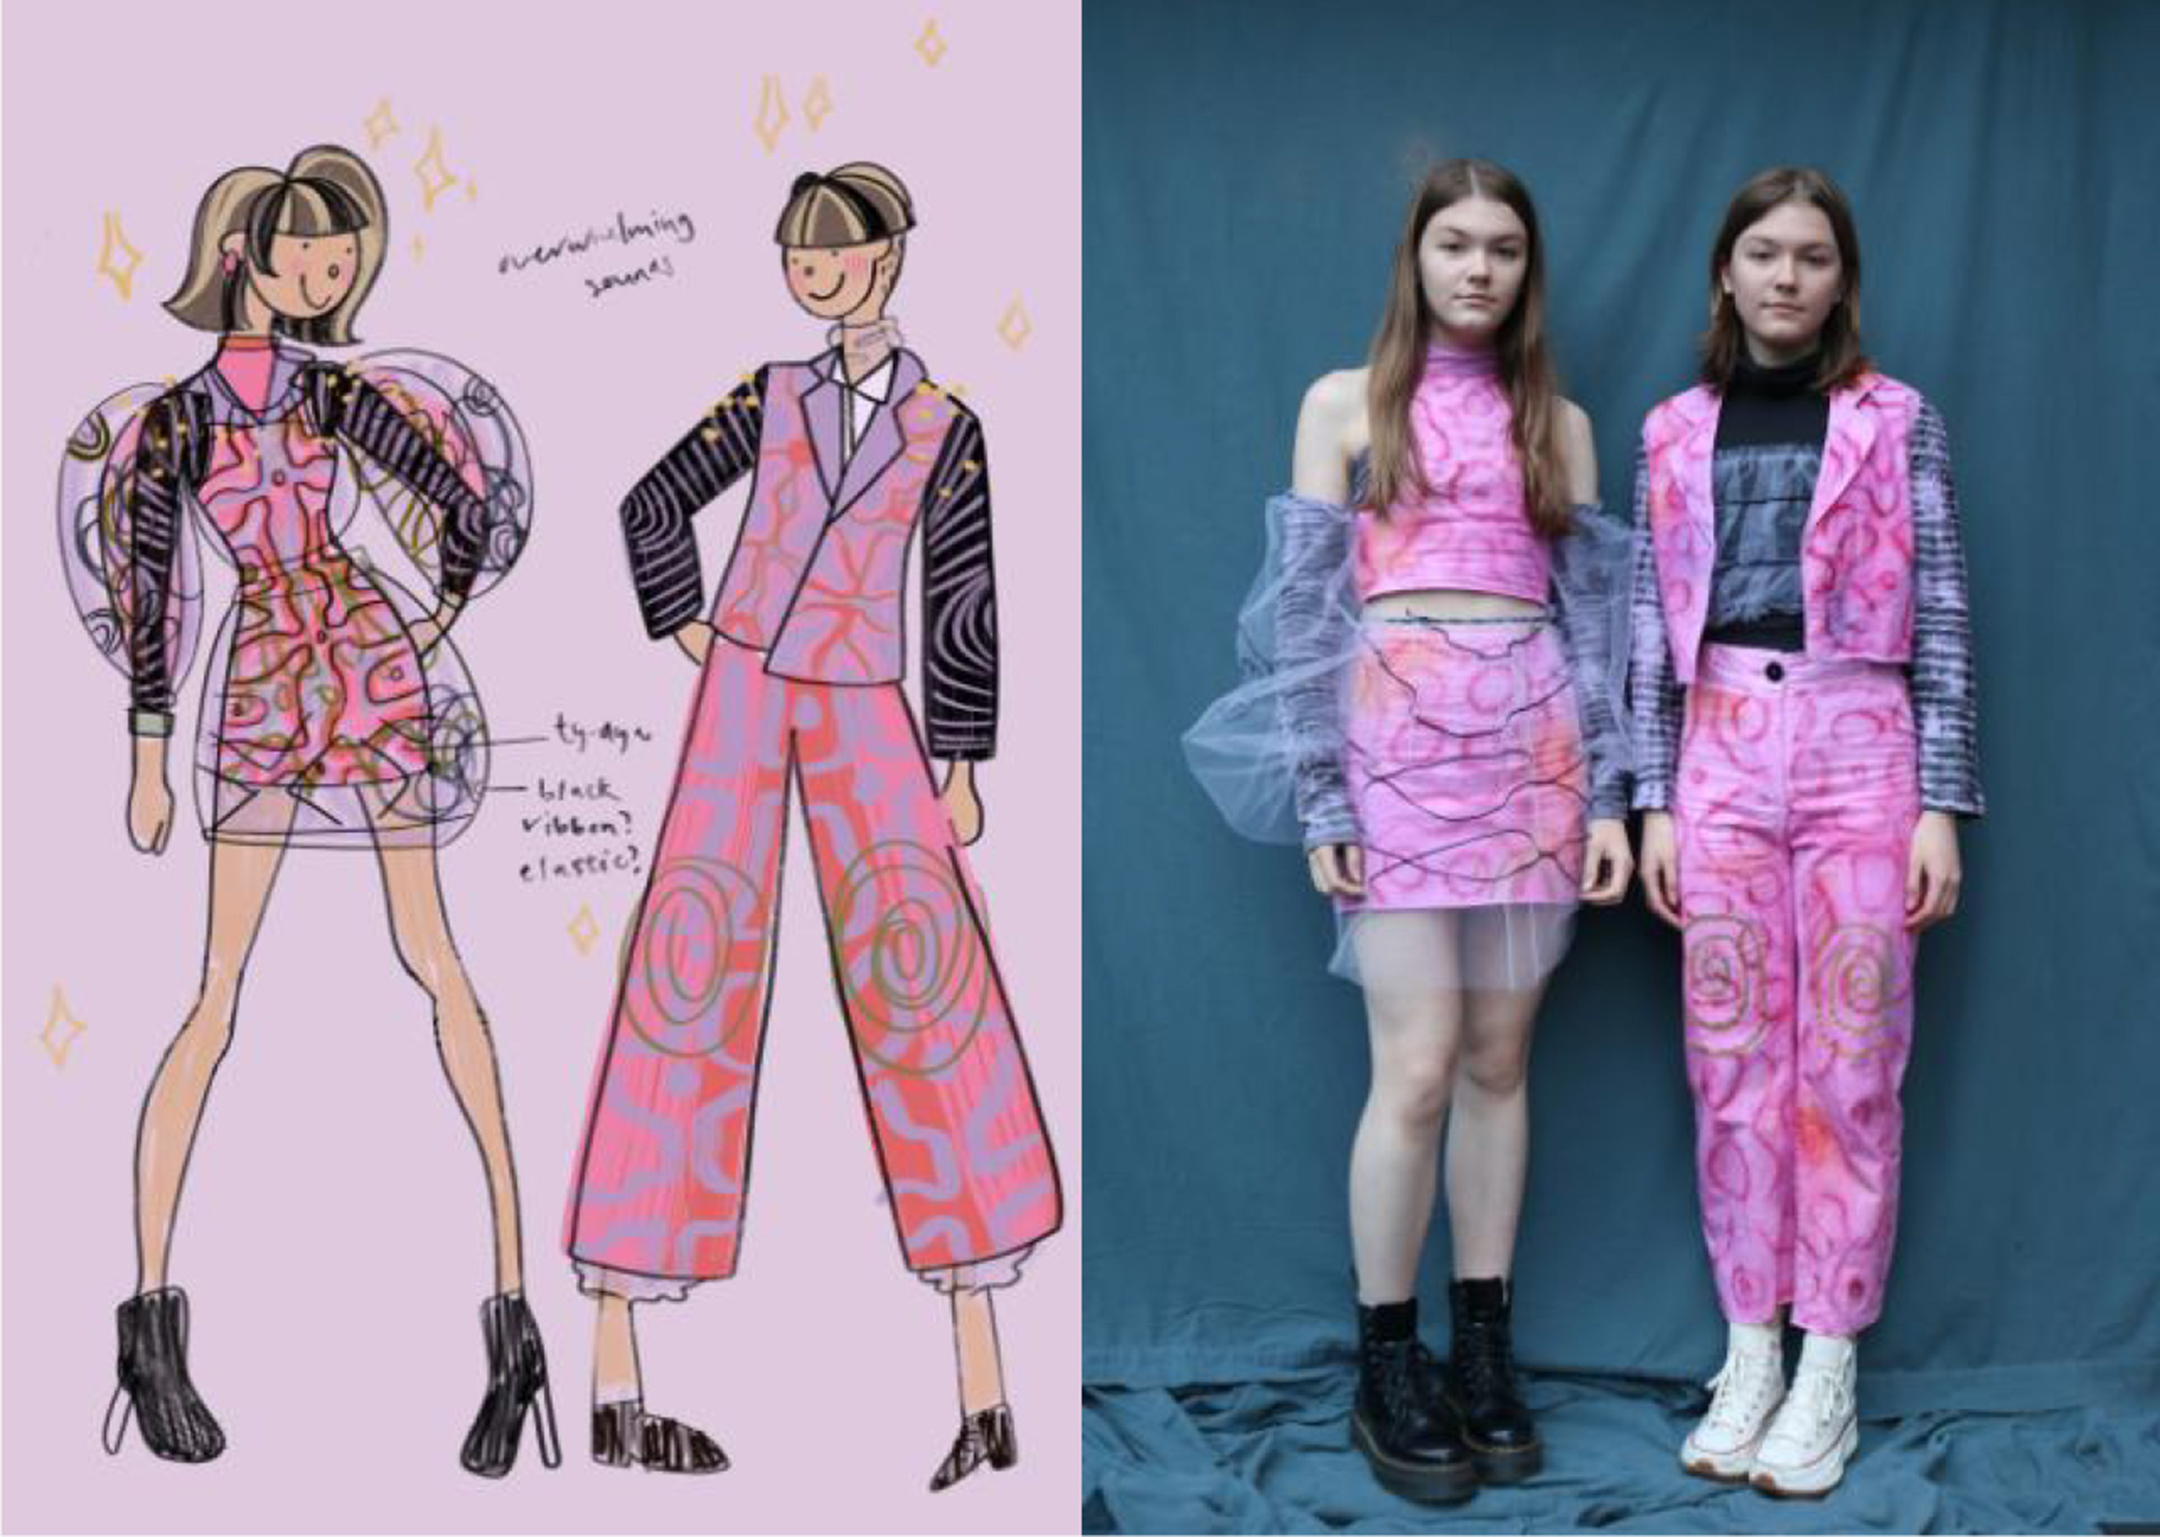 An illustration of two pink dresses next to a photo of two young women wearing the garments